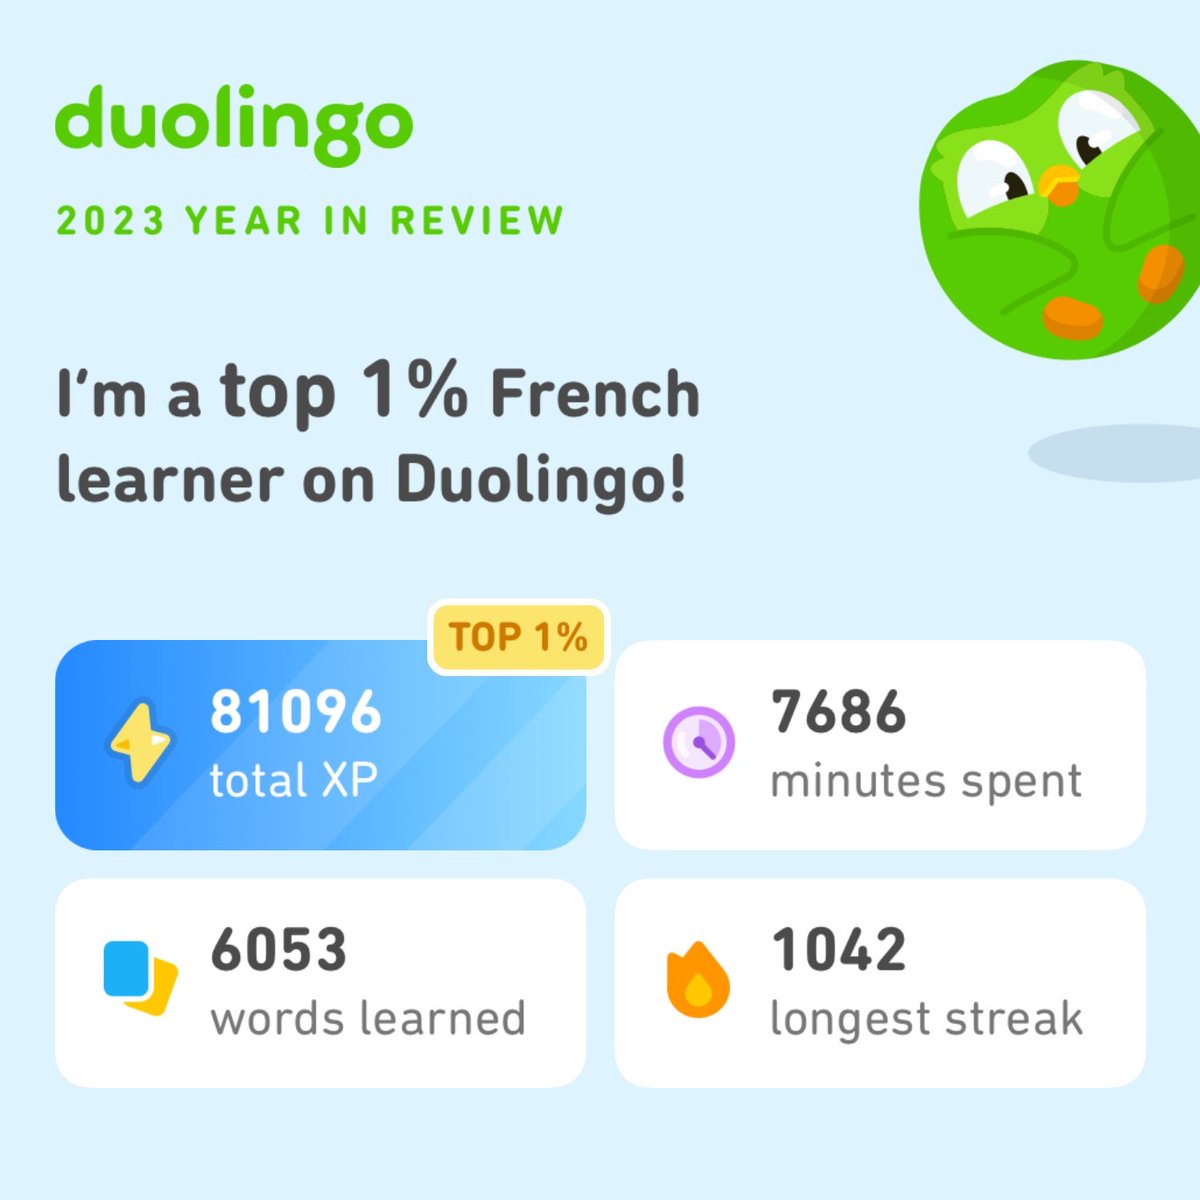 Just a language nerd studying French. Look how much I learned on Duolingo in 2023! How did you do? #Duolingo365